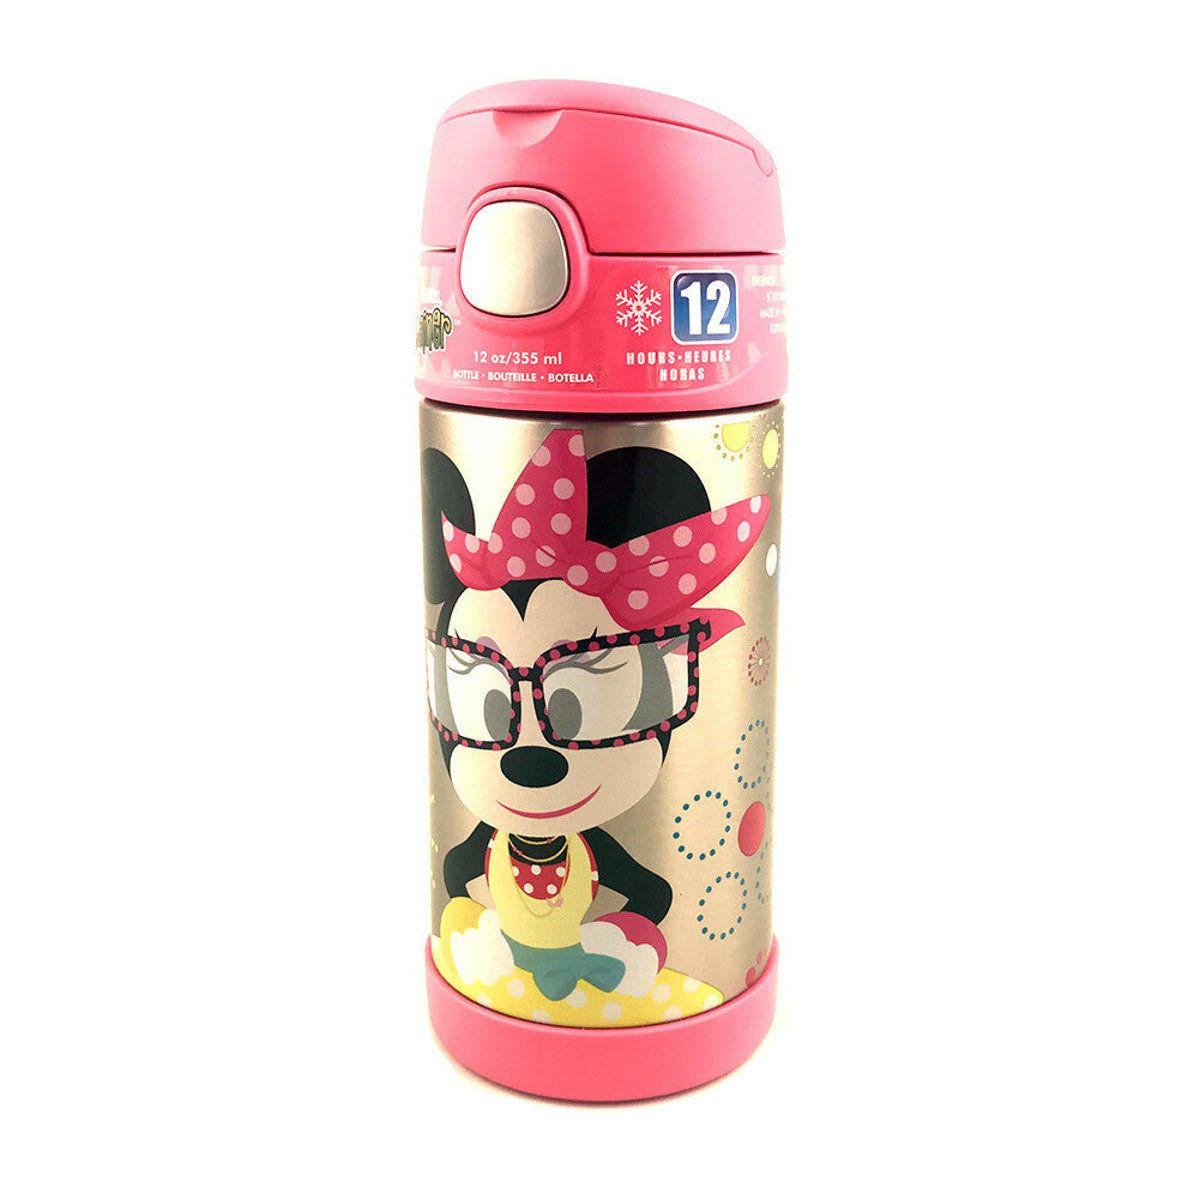 https://images.verishop.com/minnie-mouse-thermos-funtainer-12-ounce-bottle/M00041205659877-1317141684?auto=format&cs=strip&fit=max&w=1200